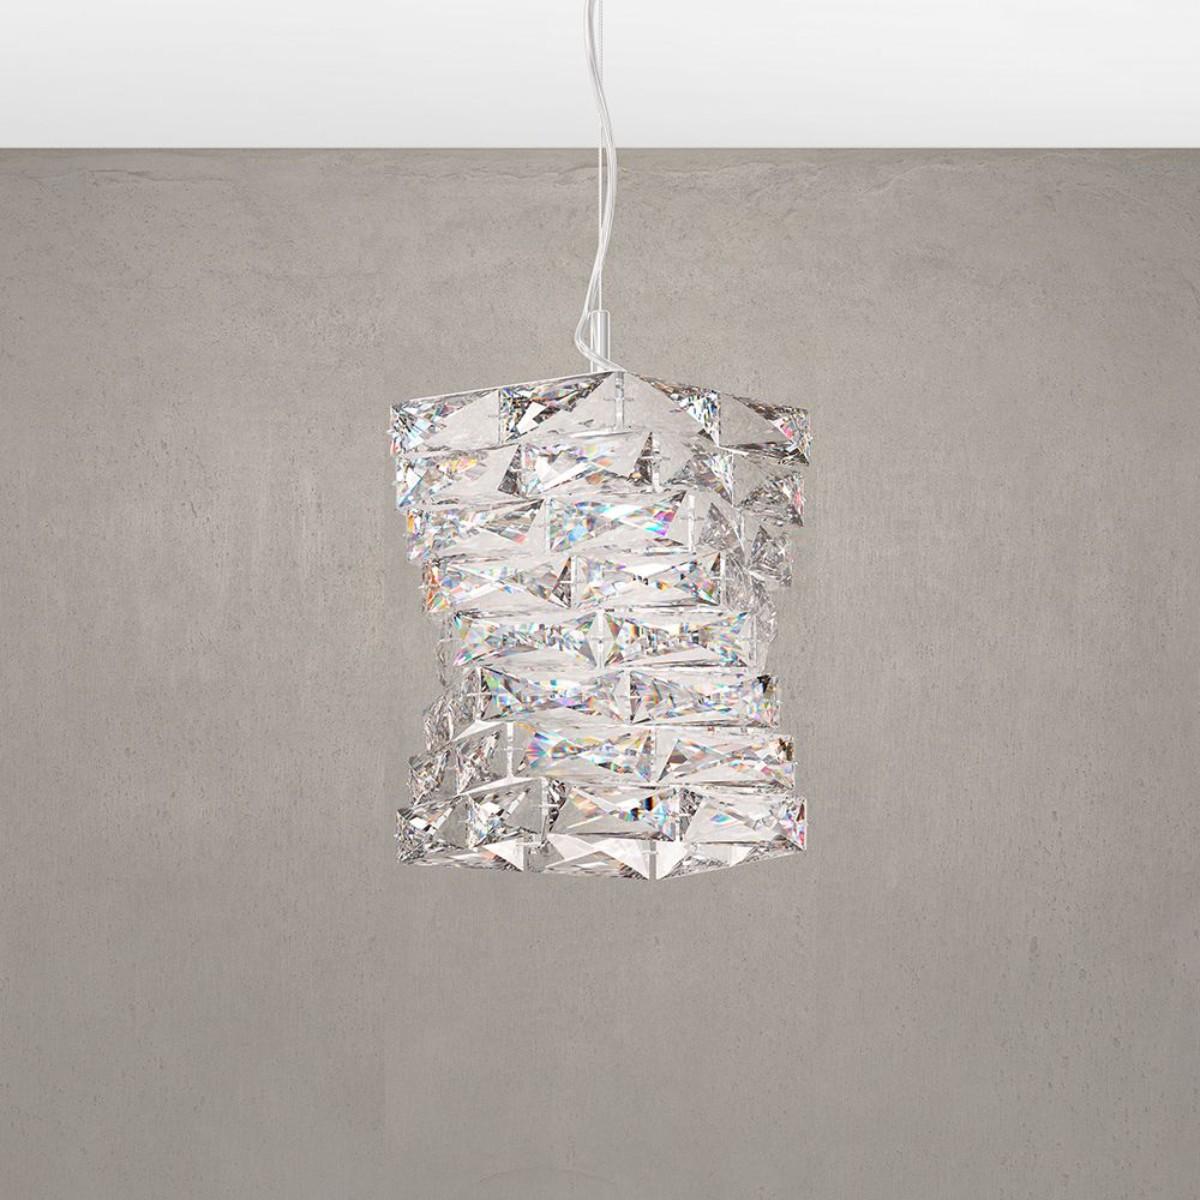 Glissando LED 9 inch Stainless Steel Pendant Light with Crystals from Swarovski